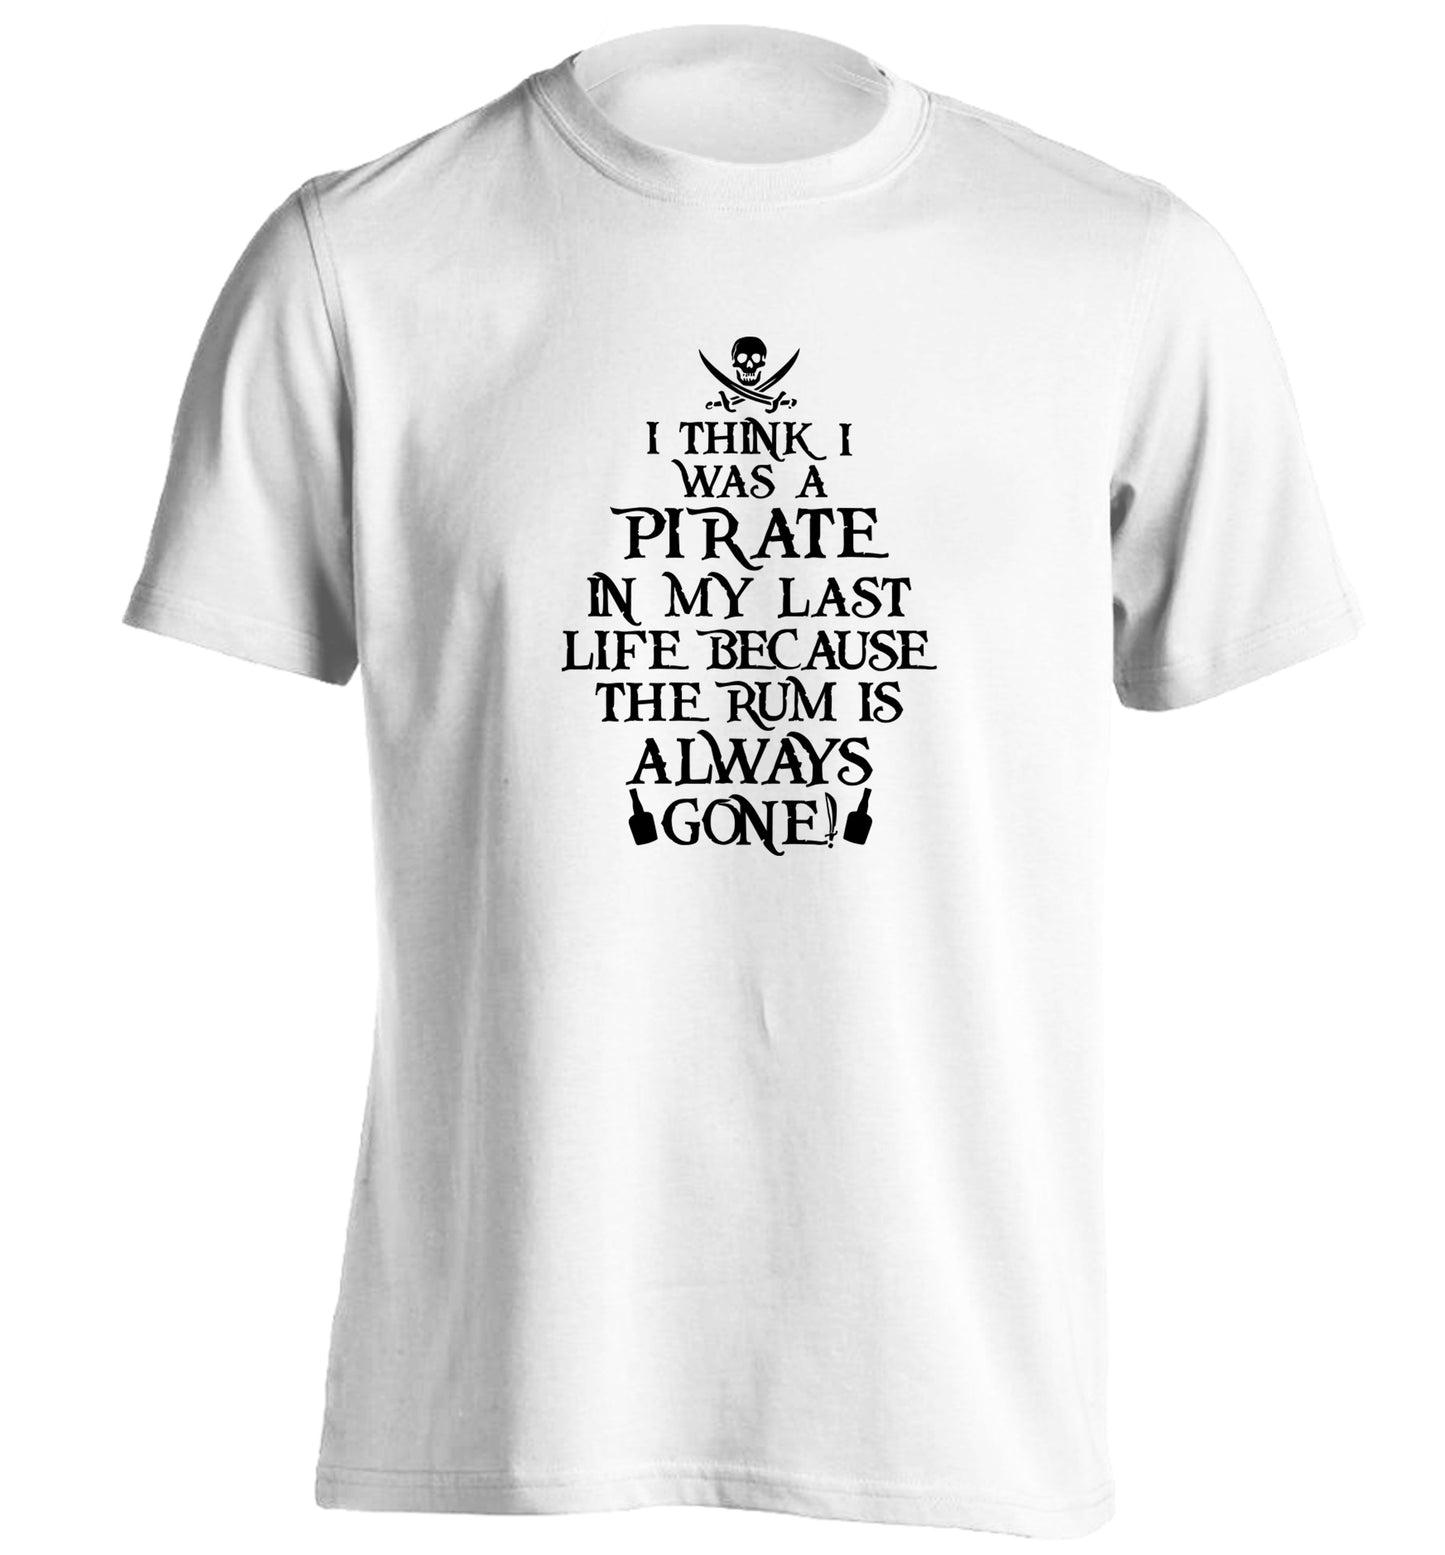 I think I was a pirate in my past life because the rum is always gone! adults unisex white Tshirt 2XL